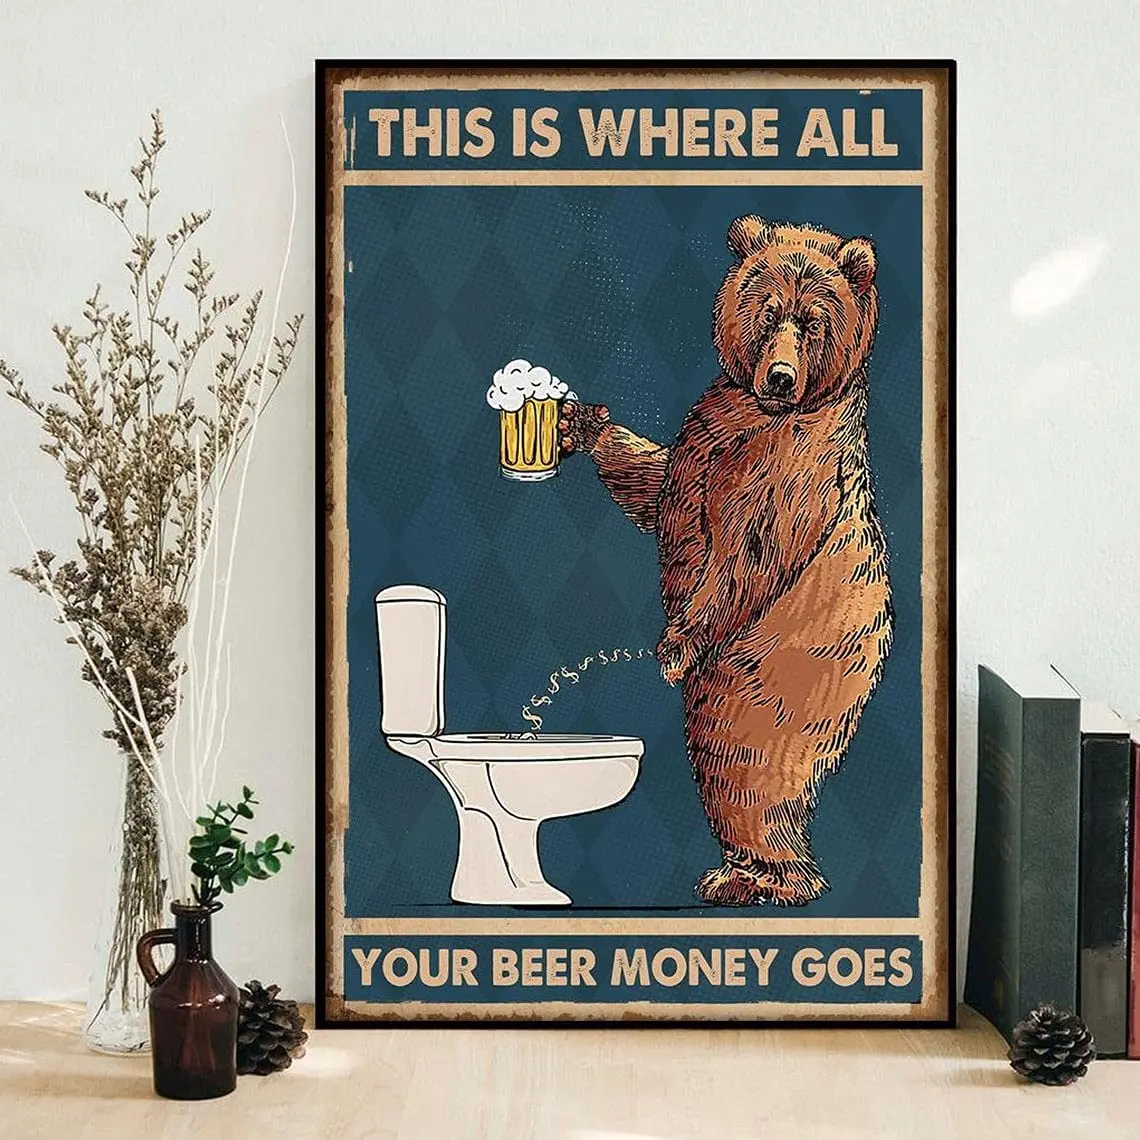 

Decorative Art Metal Tin Sign This Is Where All Your Beer Money Goes Poster Lover Gift Home Decor Wall Decor Cat Artwork Wall